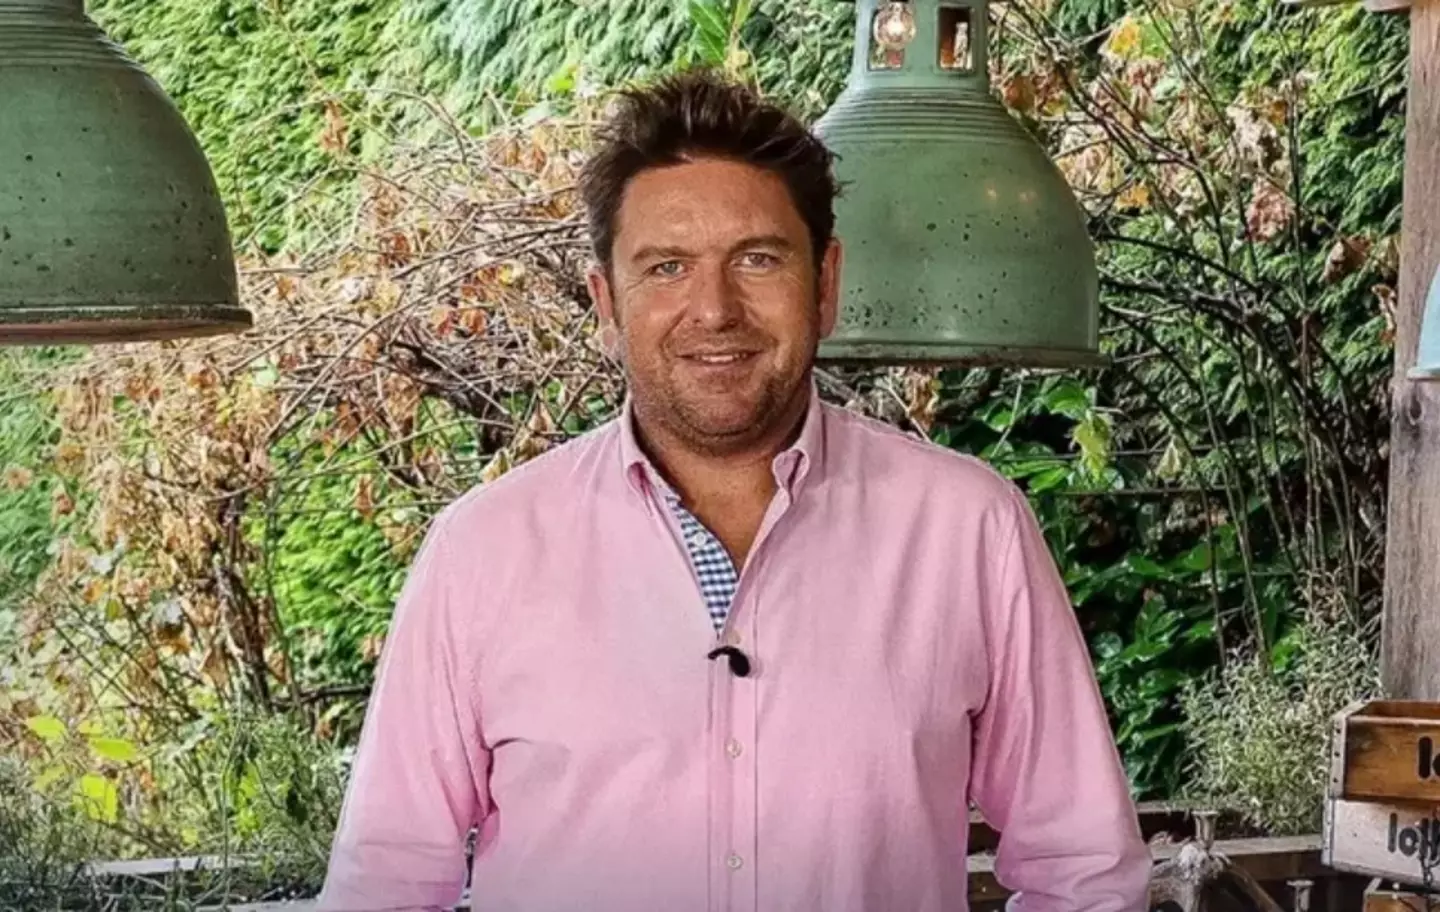 James Martin swore 42 times in the lengthy rant.